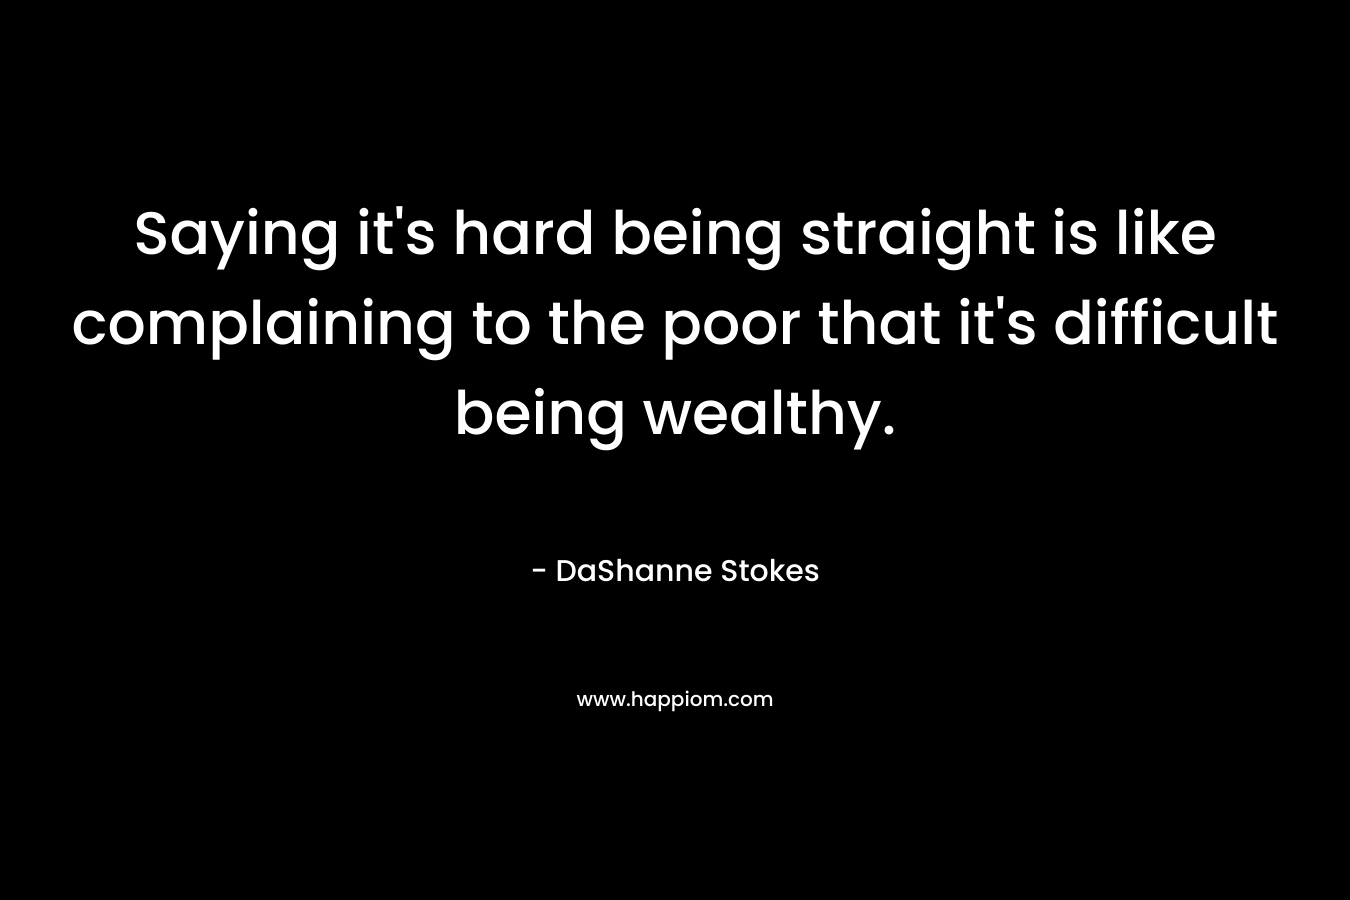 Saying it’s hard being straight is like complaining to the poor that it’s difficult being wealthy. – DaShanne Stokes